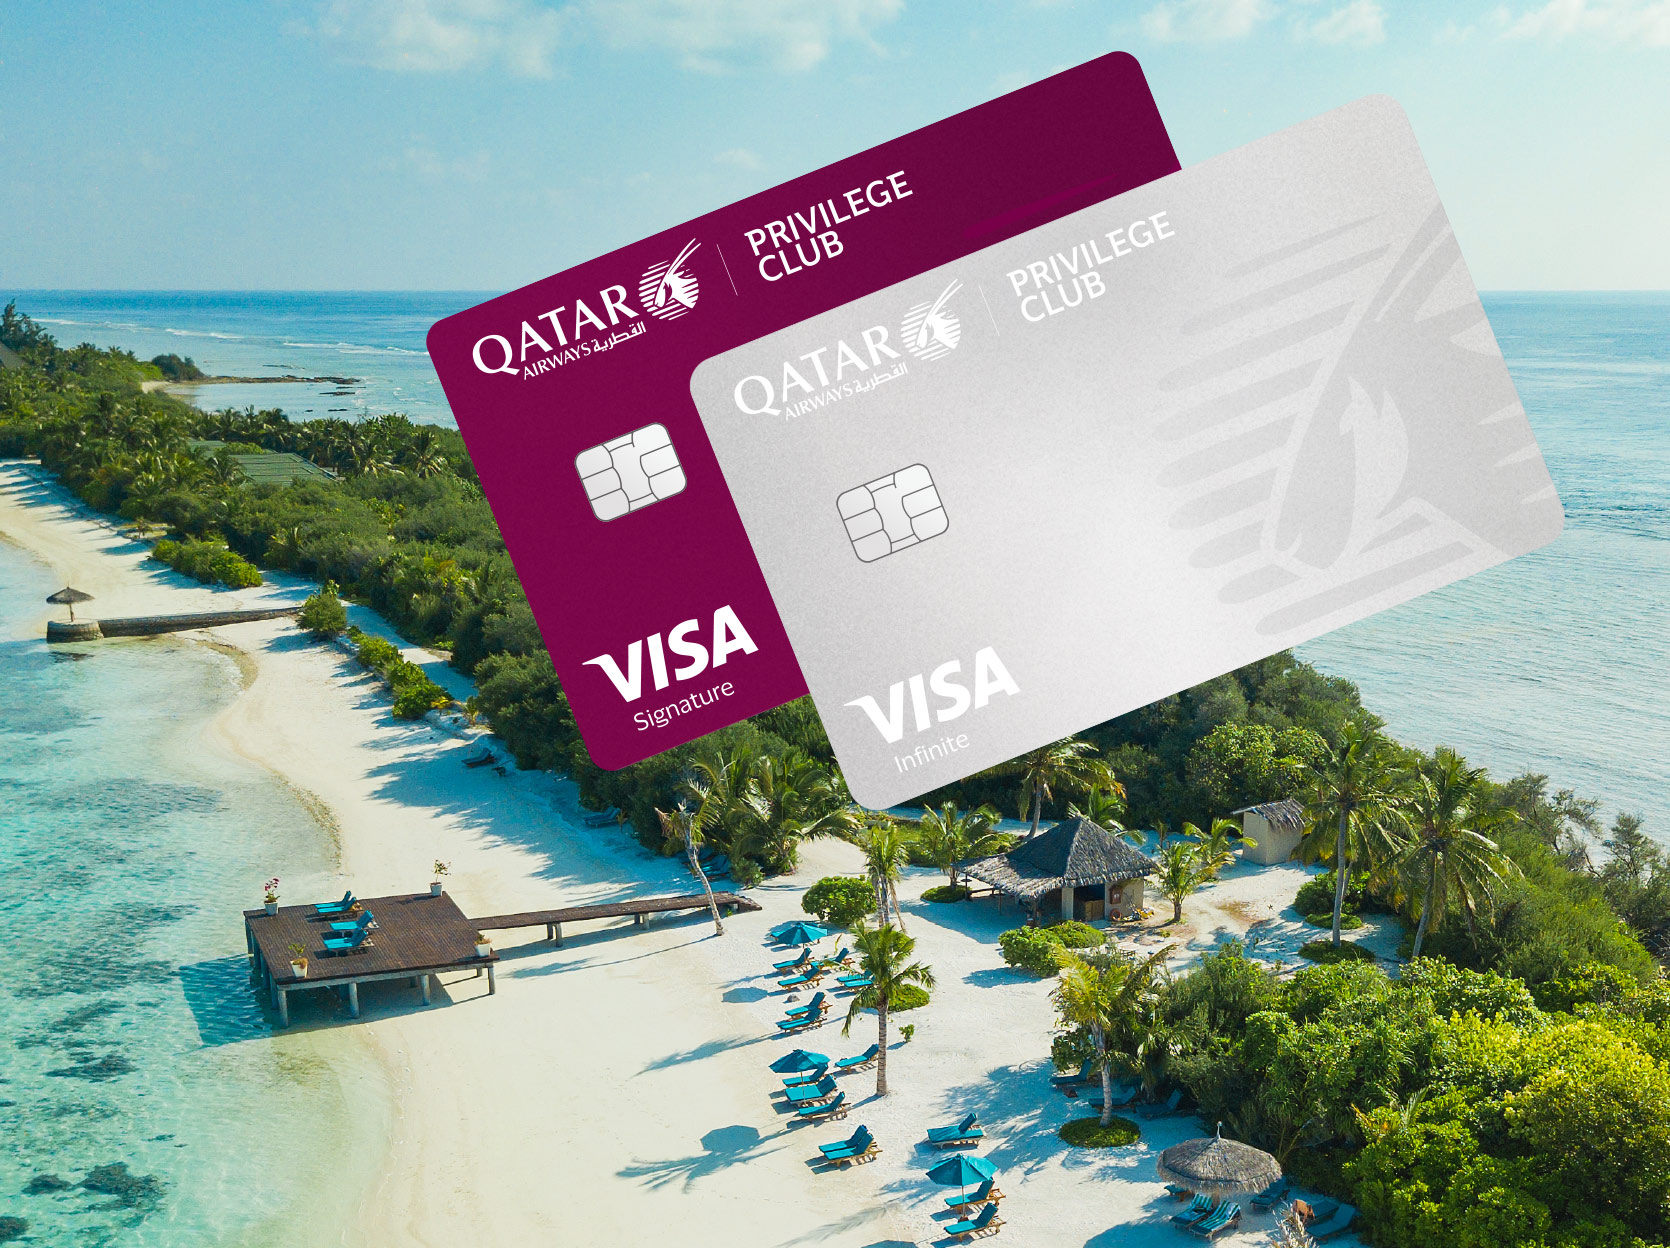 Cardless Launches First Qatar Airways Cards In U.S.